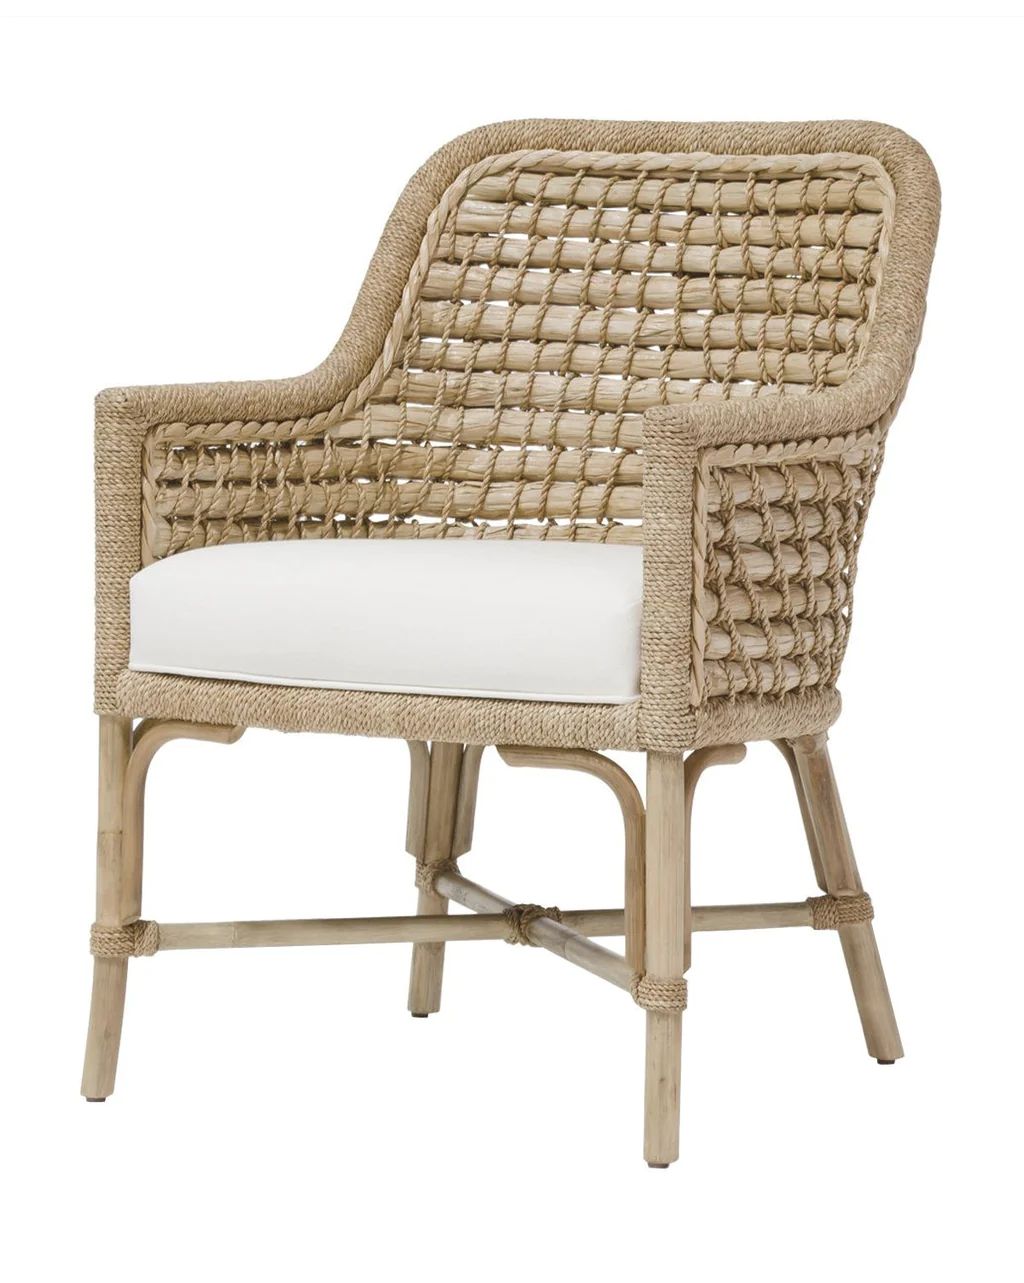 Catriona Chair | McGee & Co.